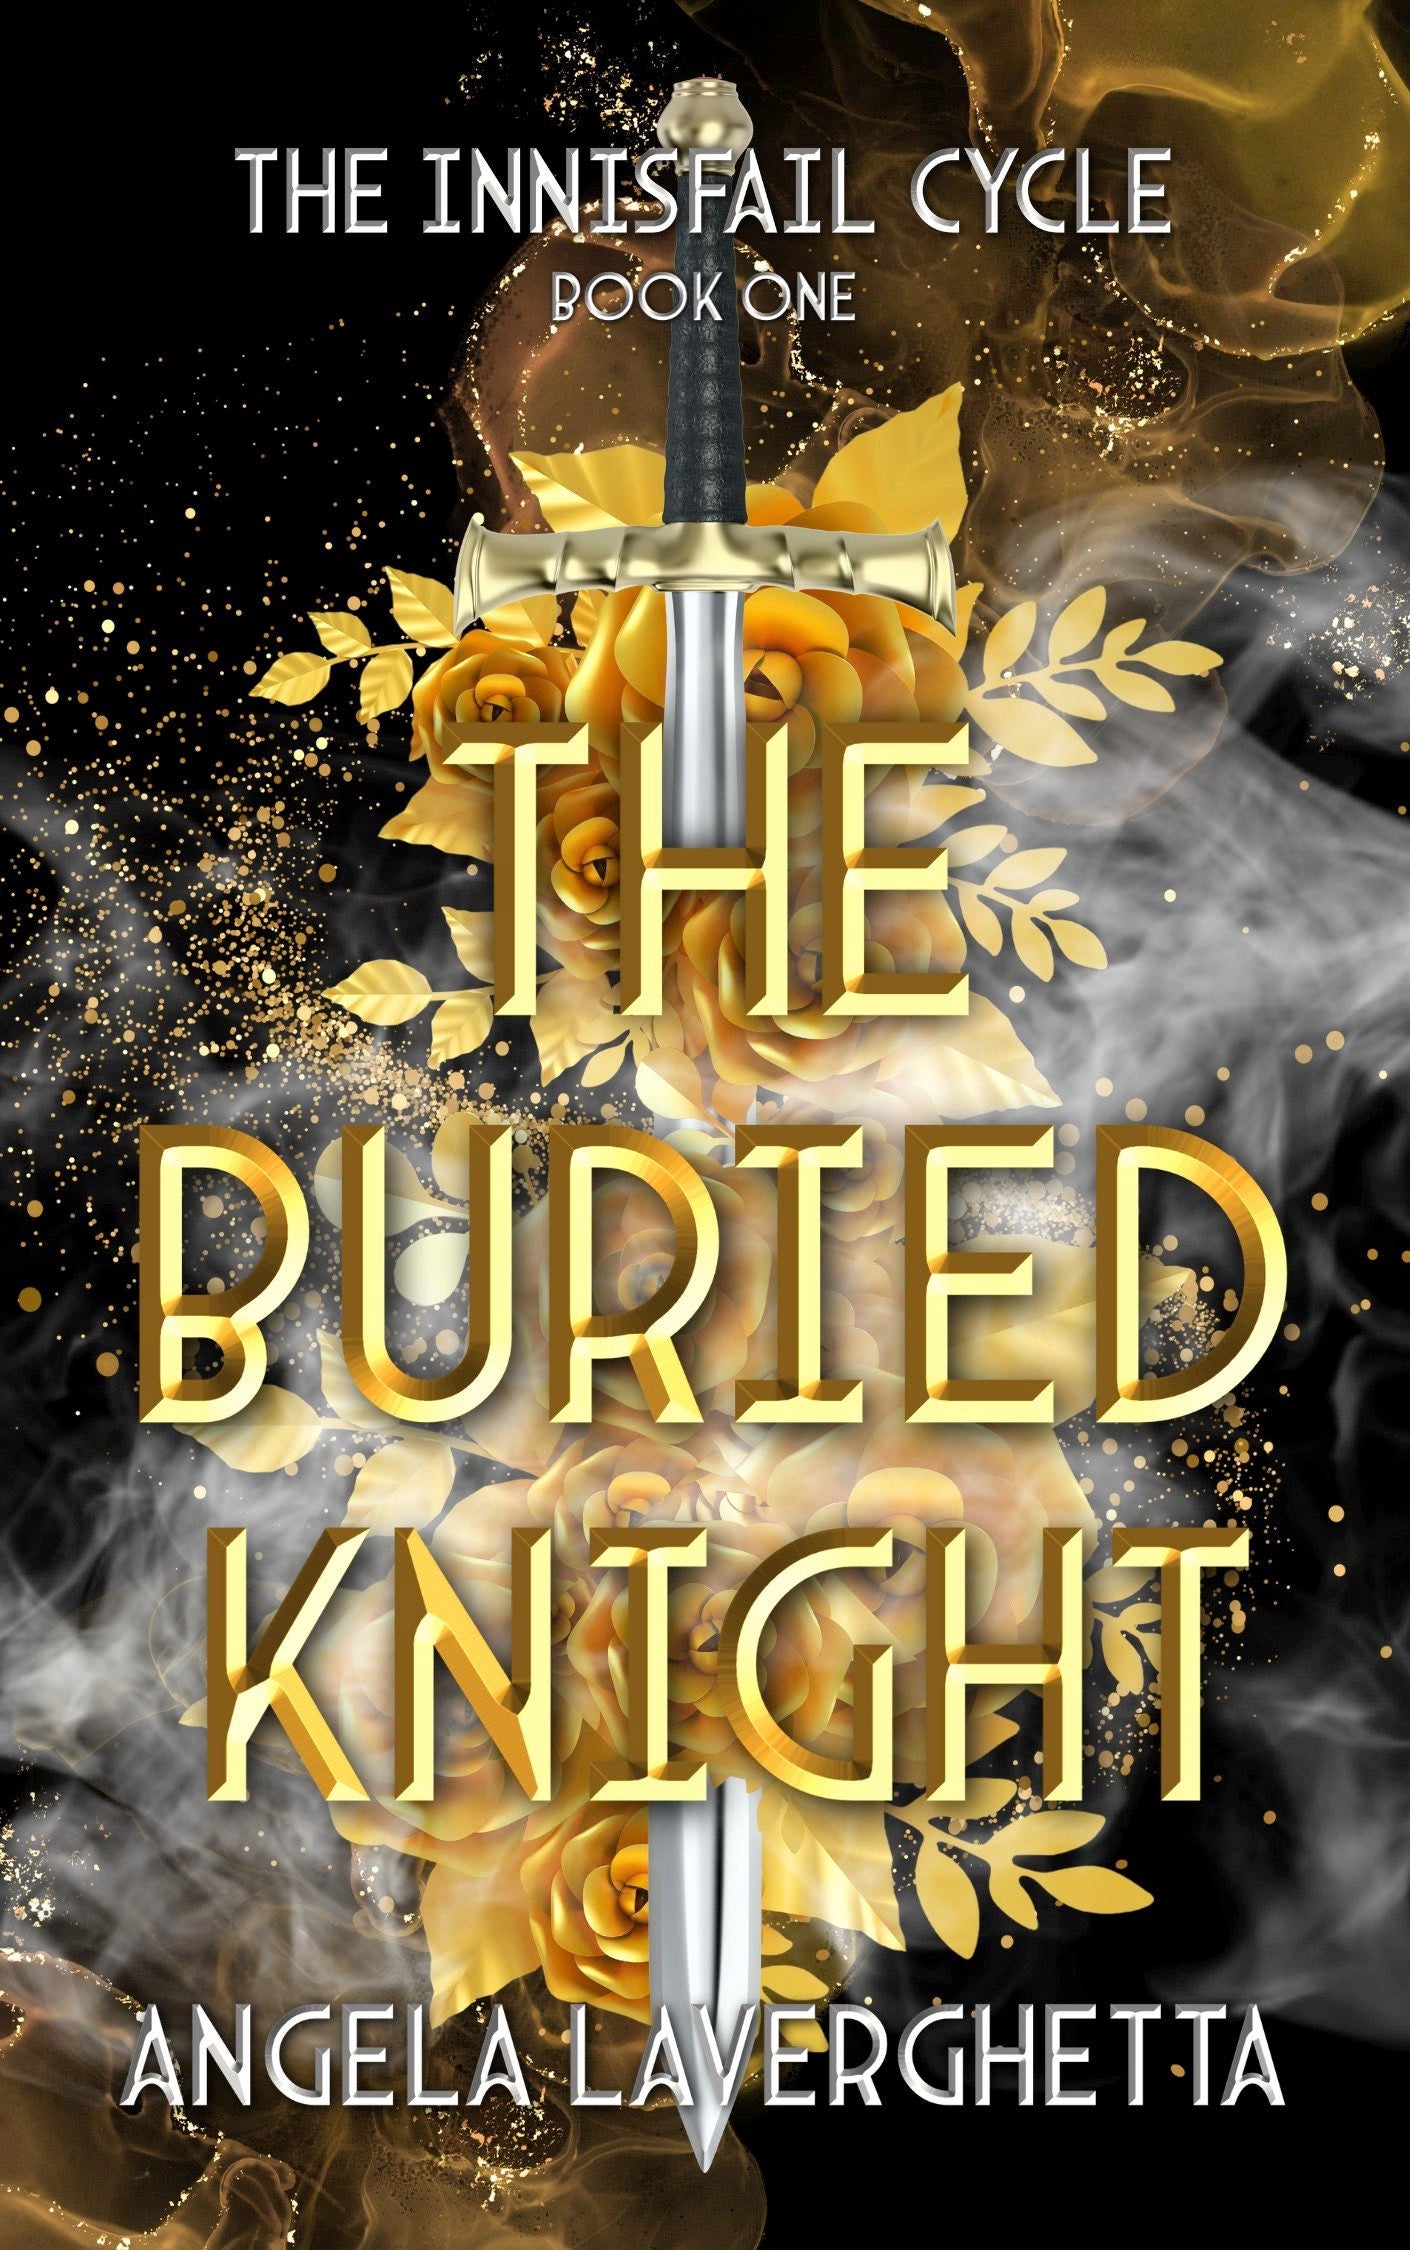 The Buried Knight Signed Paperback